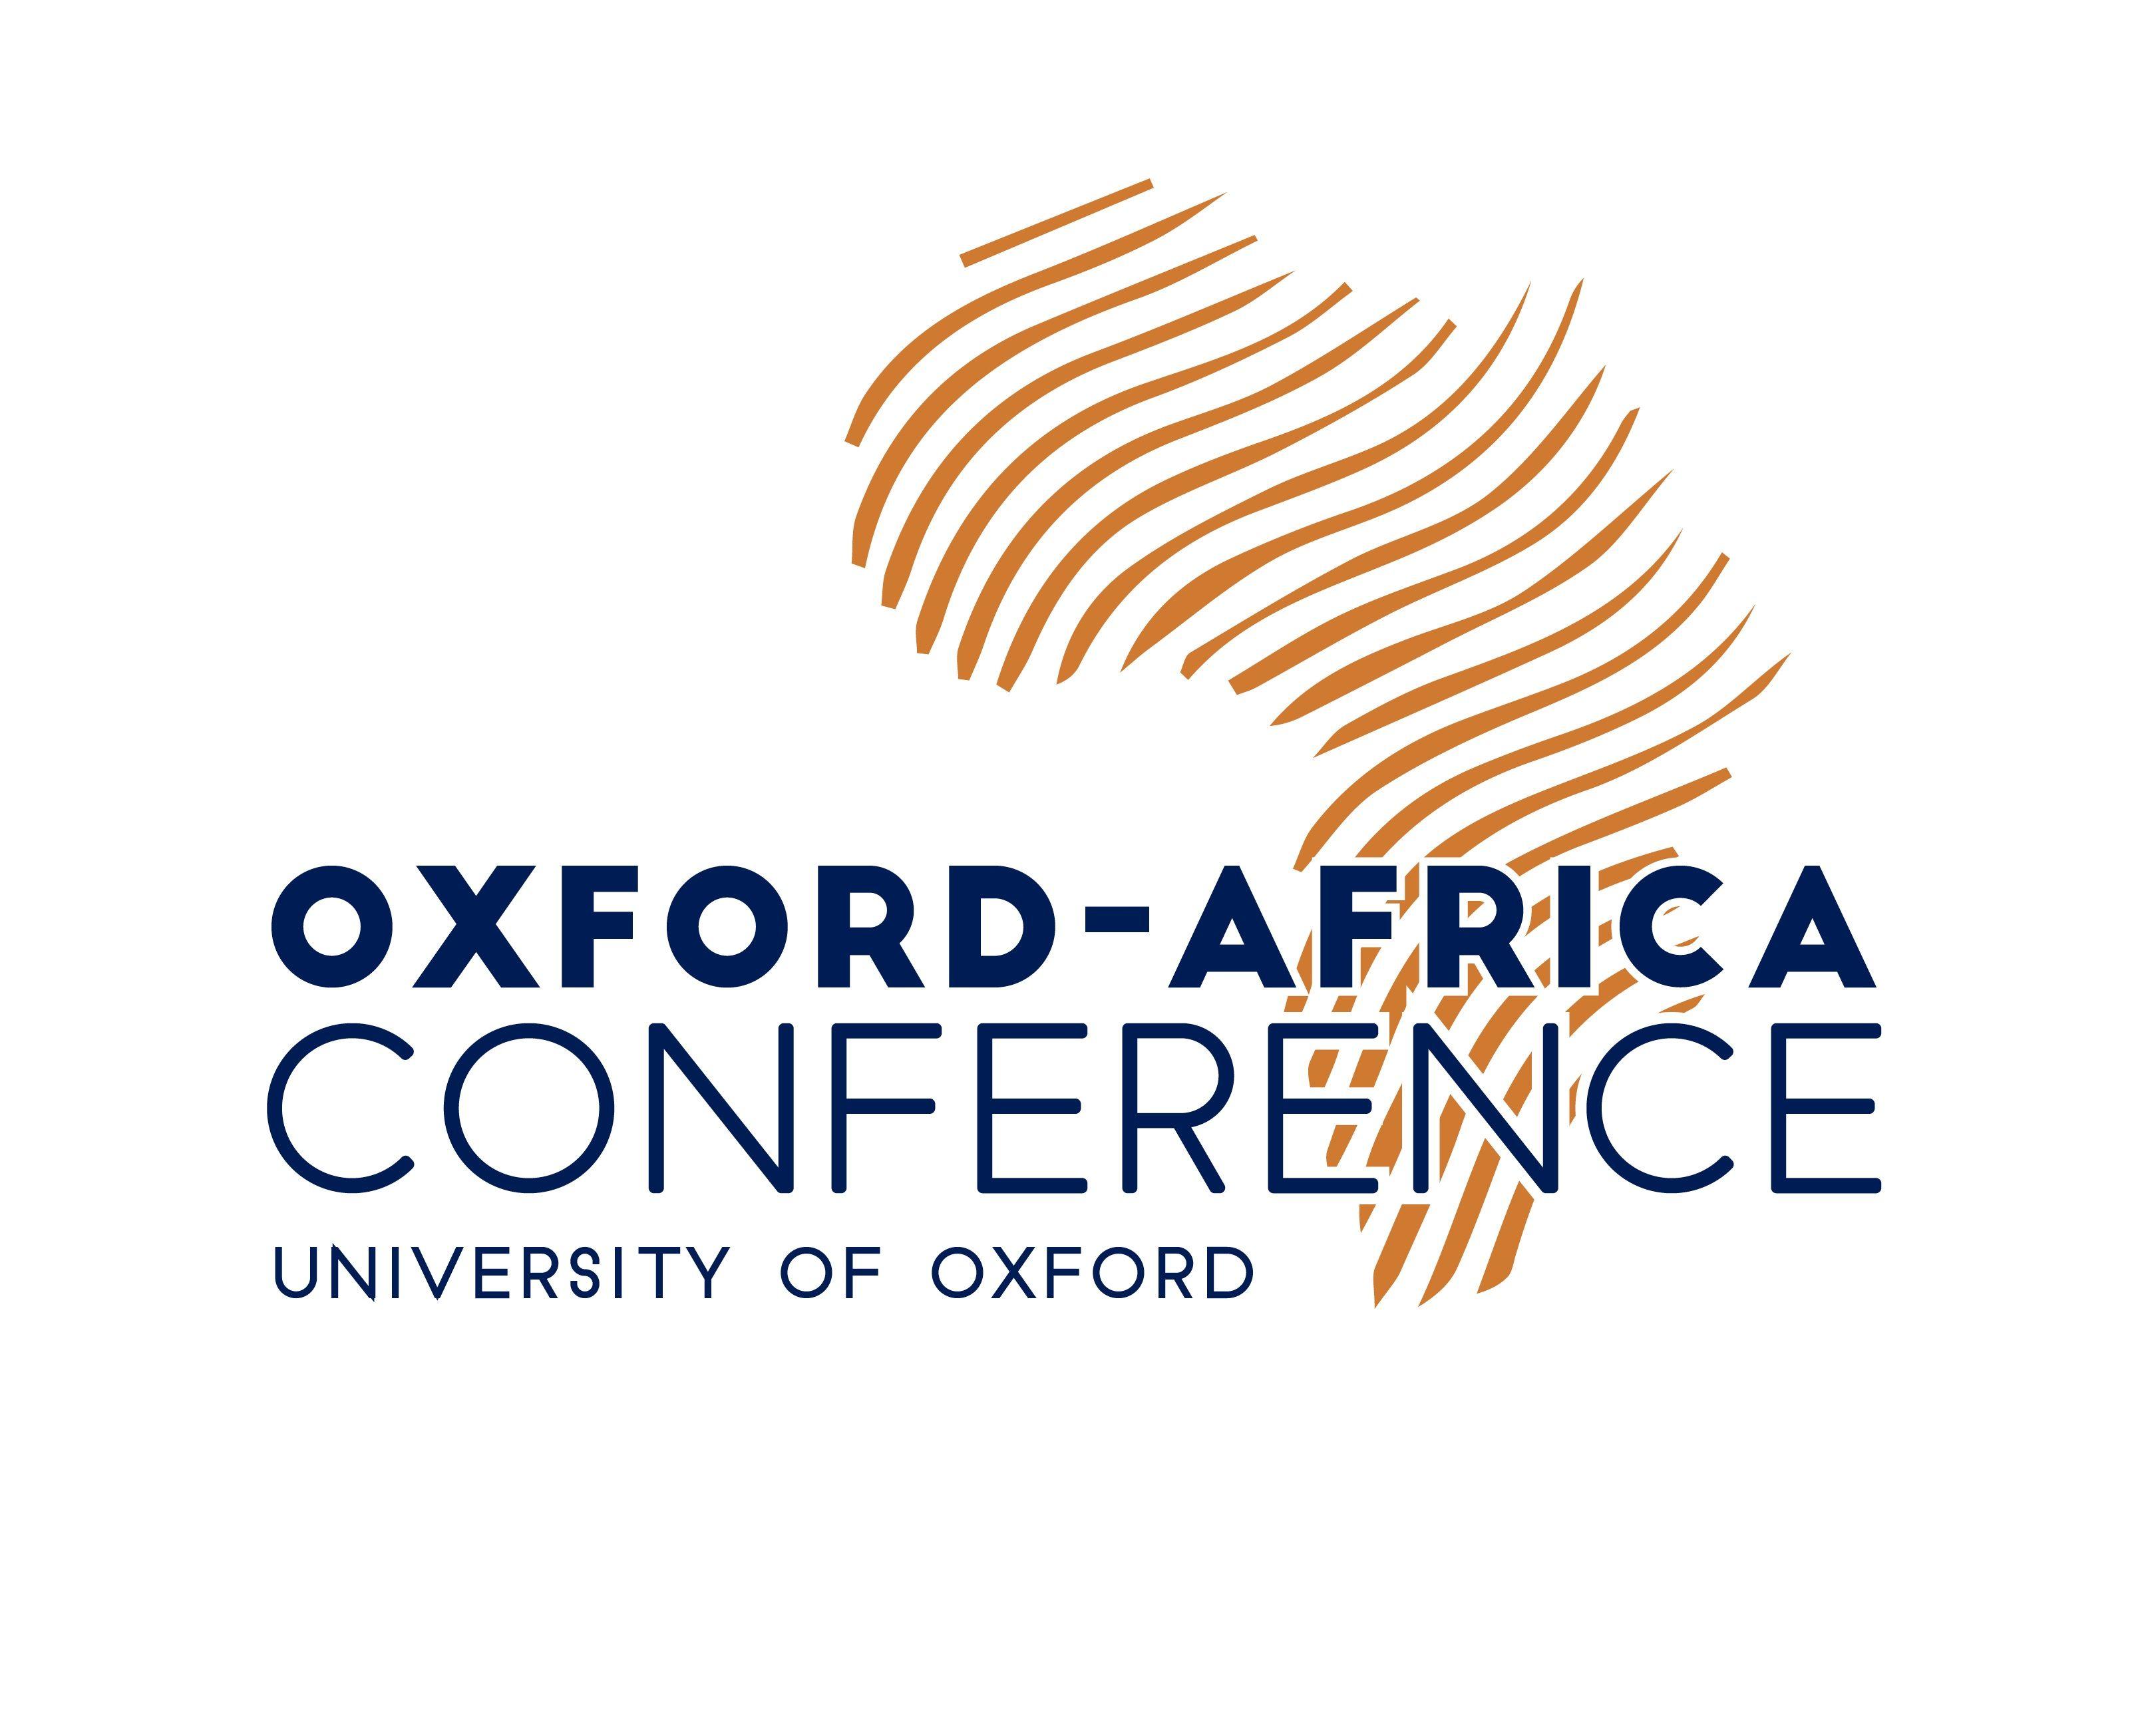 Oxford Logo - Oxford Africa Conference 2019